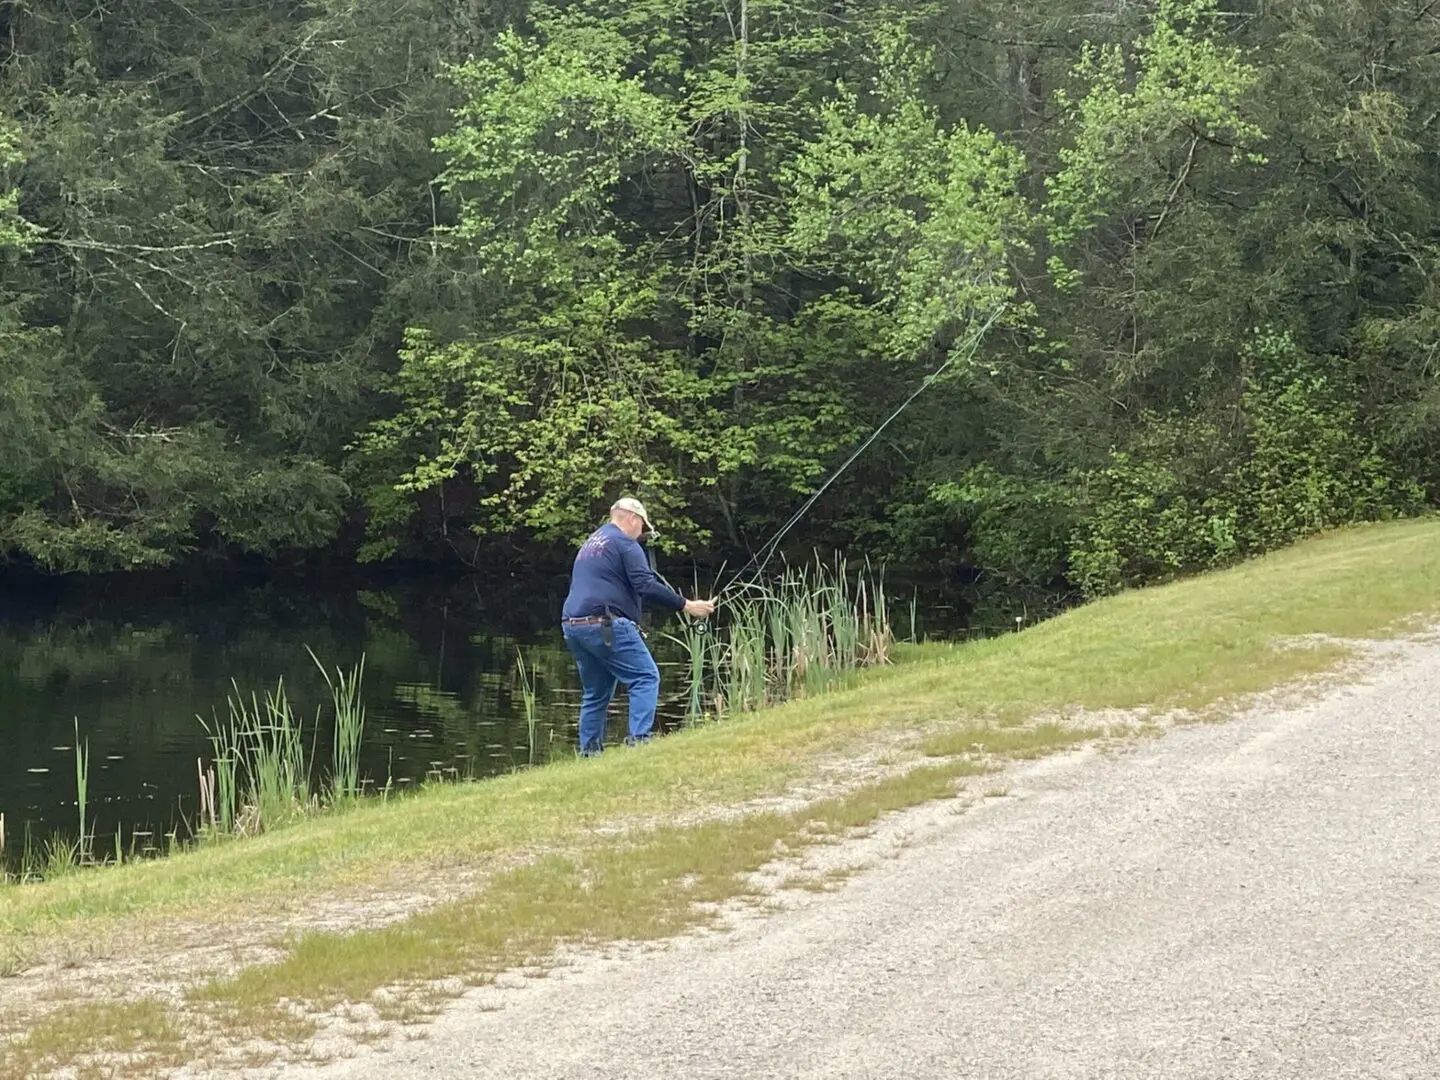 A Man in Blue Shirt and Jeans Fishing With Fishing Rope